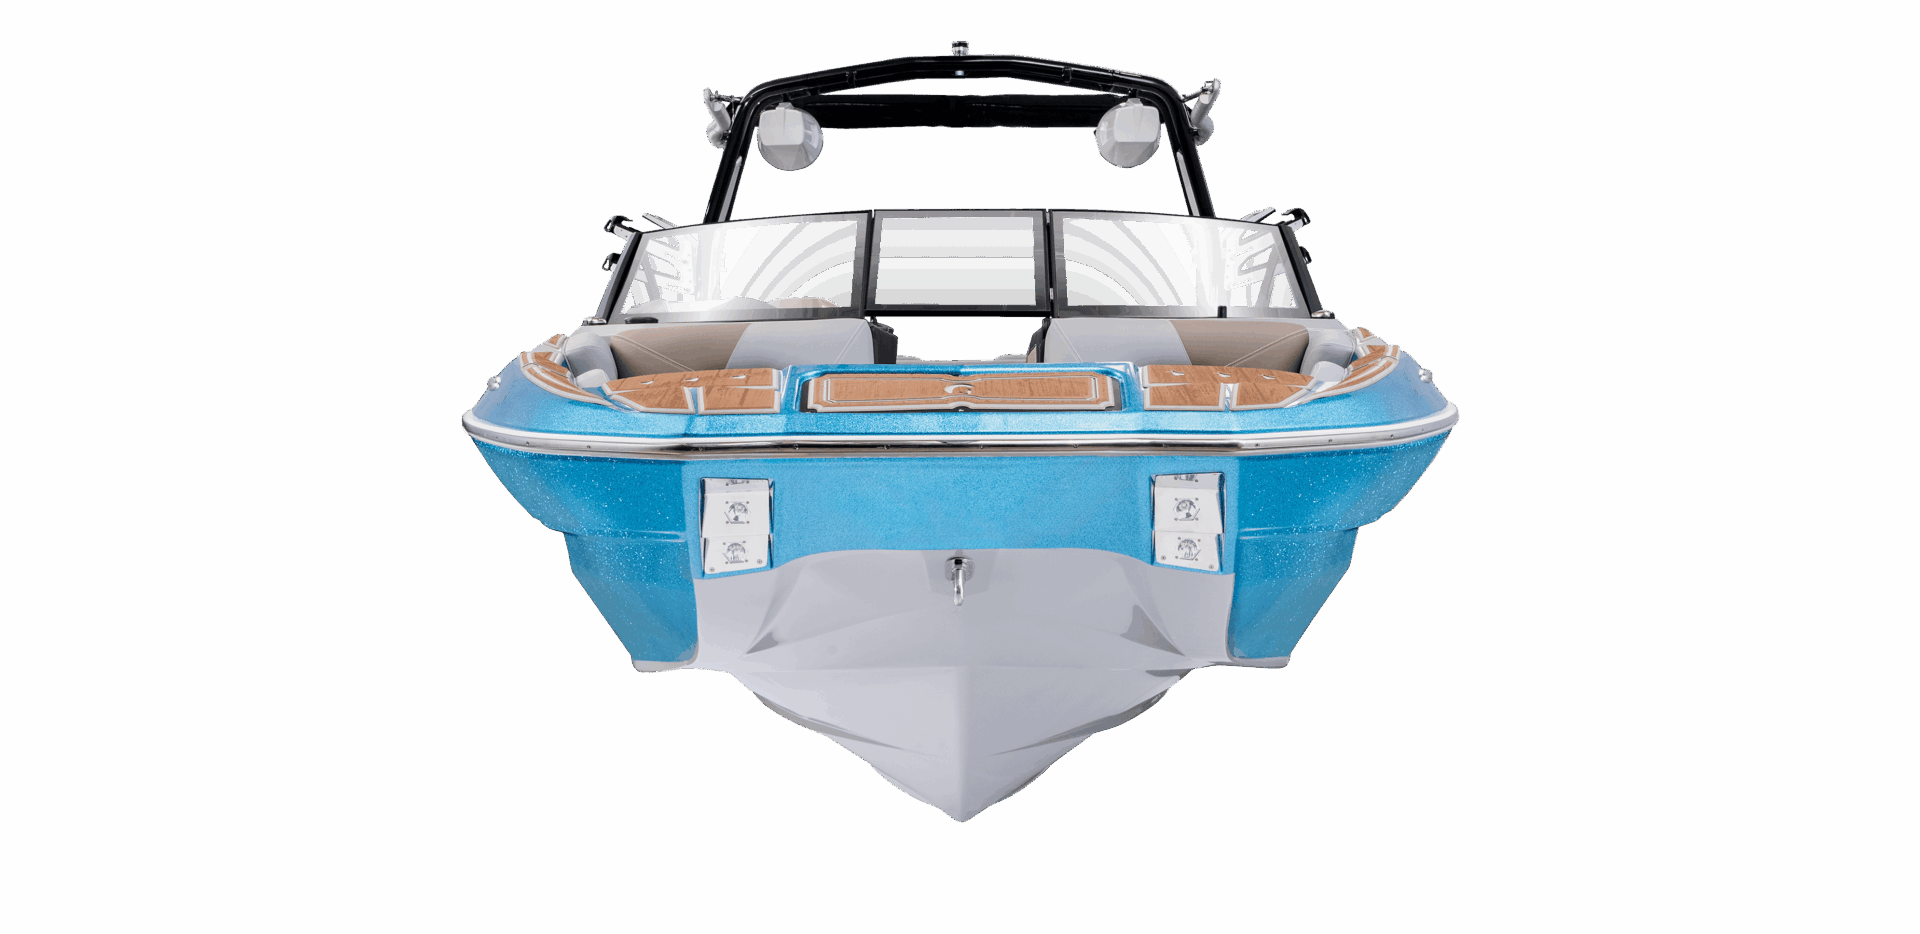 Front view of the sleek blue and white Centurion Fe22 motorboat with seating and steering console, displayed against a solid black background.